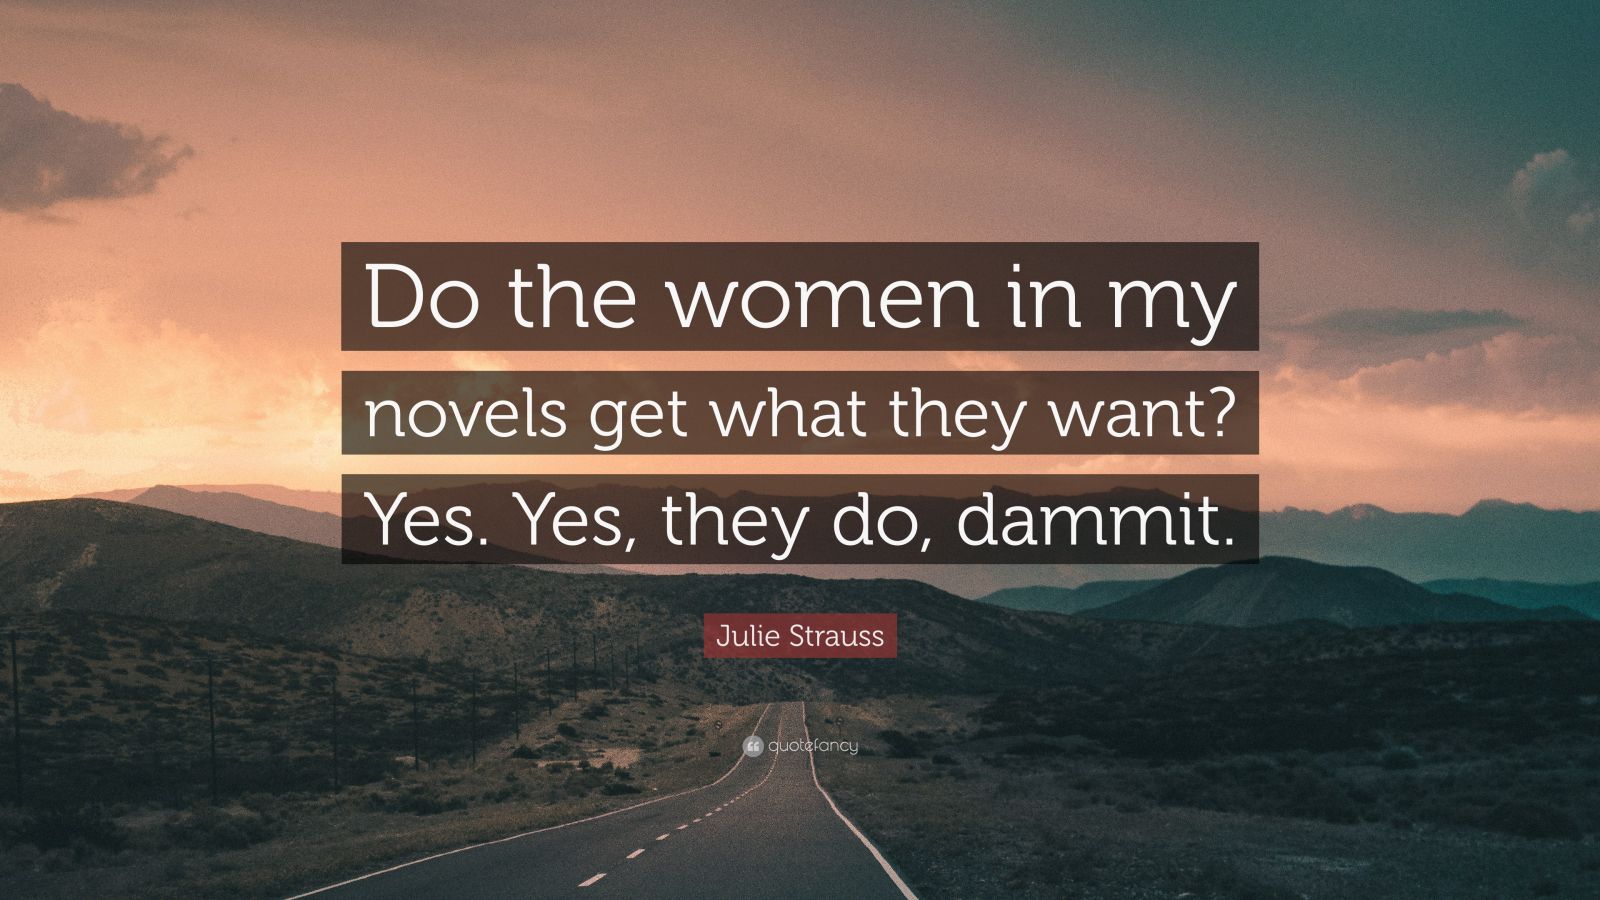 Julie Strauss Quote: “Do the women in my novels get what they want? Yes ...